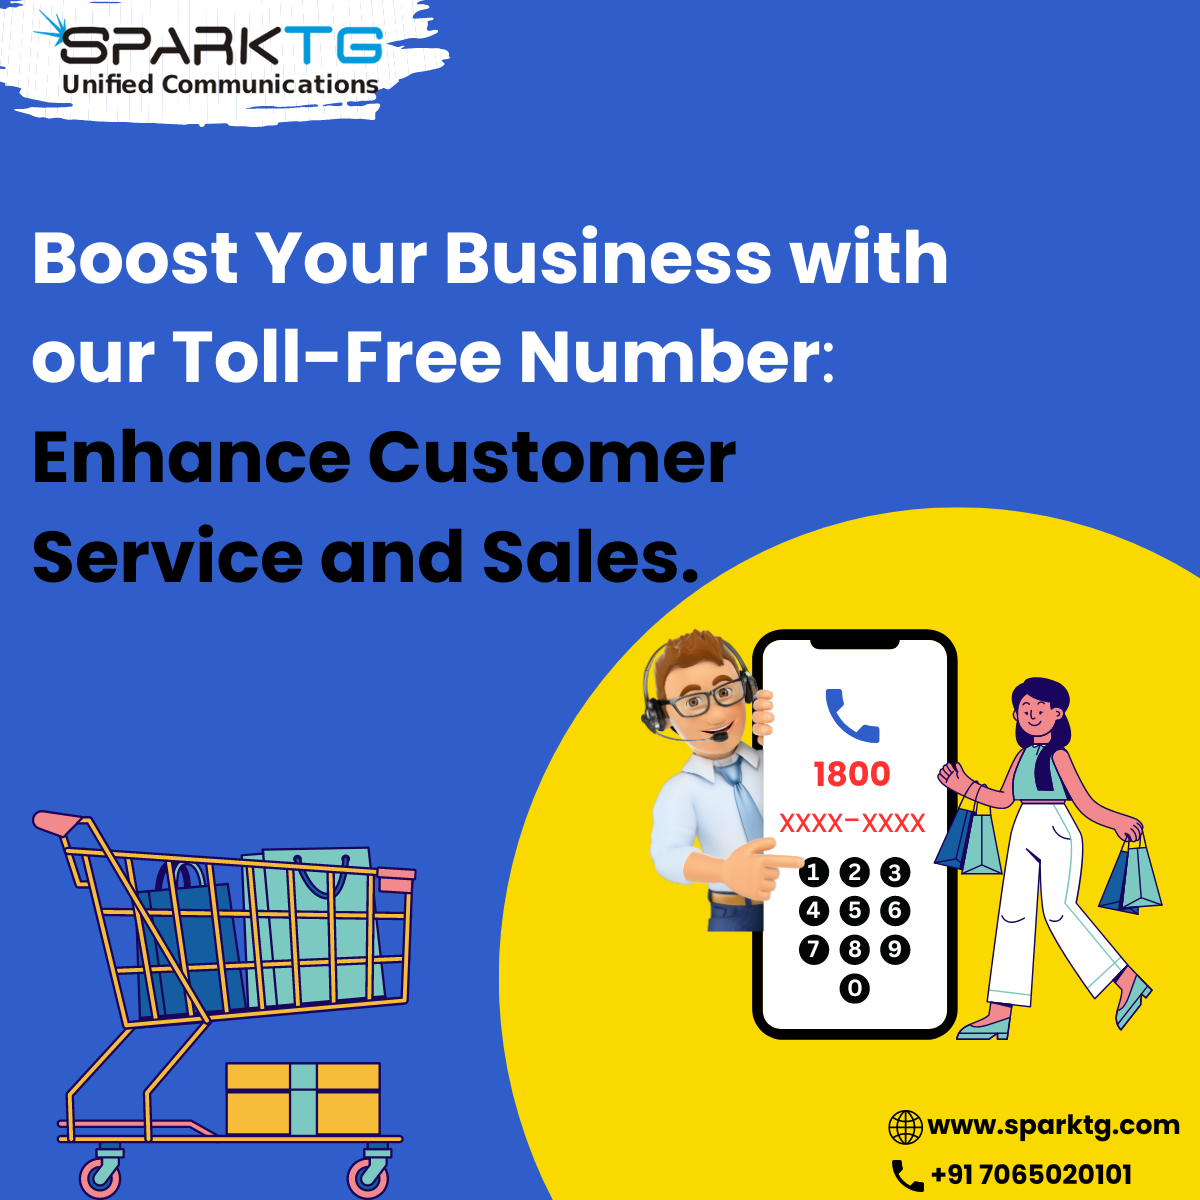 How to Implement Boost Your Business with Toll-Free Numbers in India